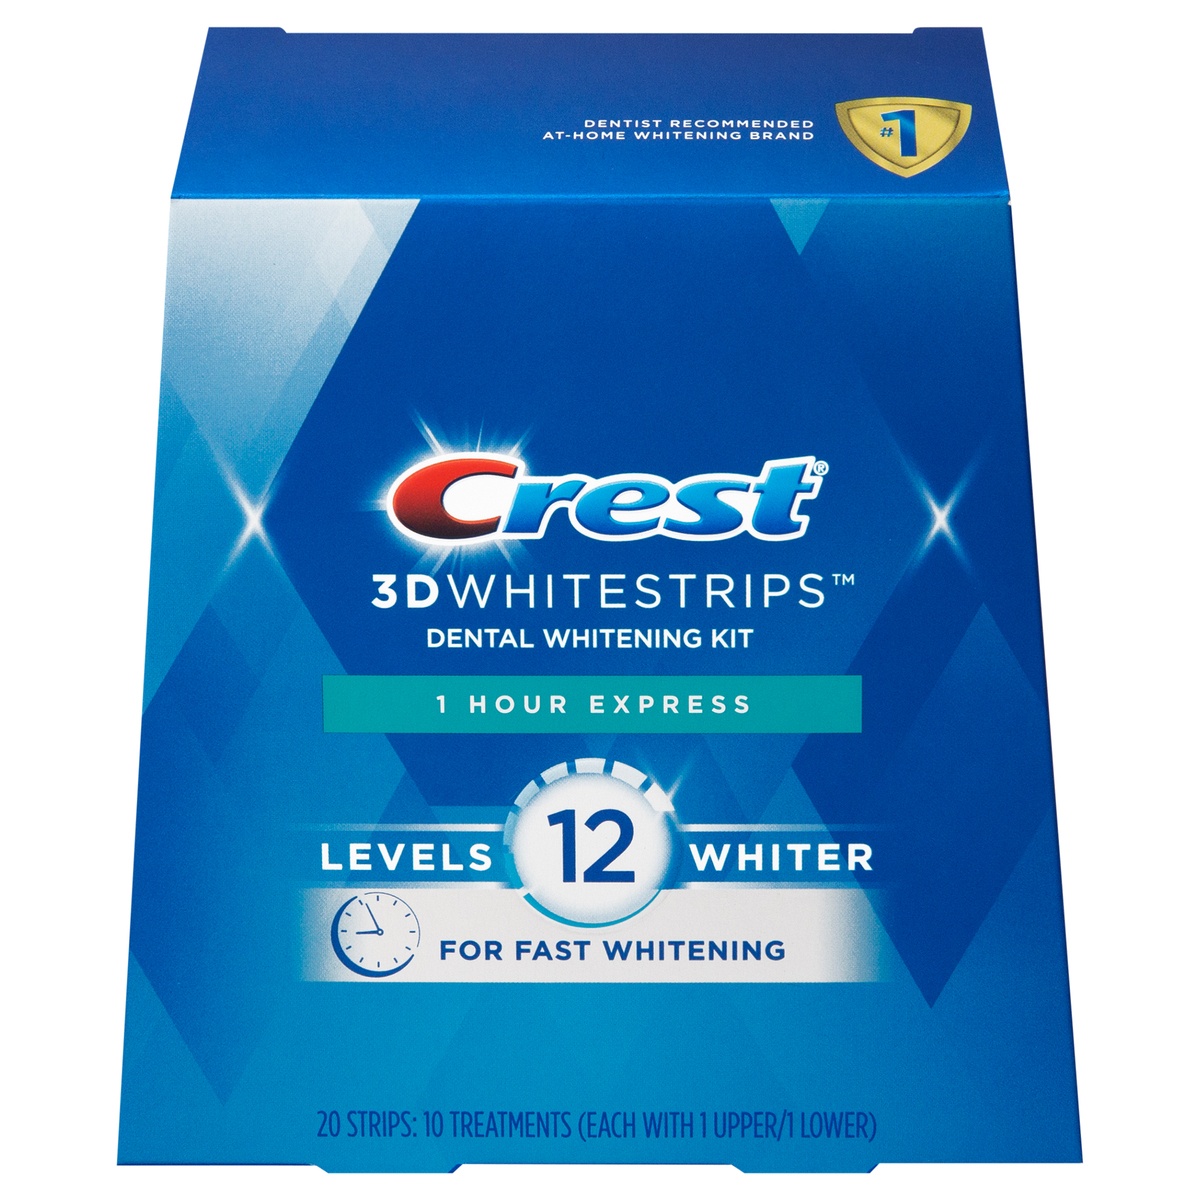 slide 5 of 5, Crest 3D Whitrstrips 1-Hour Express At-home Teeth Whitening Kit, 10 Treatments, 12 Levels Whiter for Fast Whitening, 20 ct